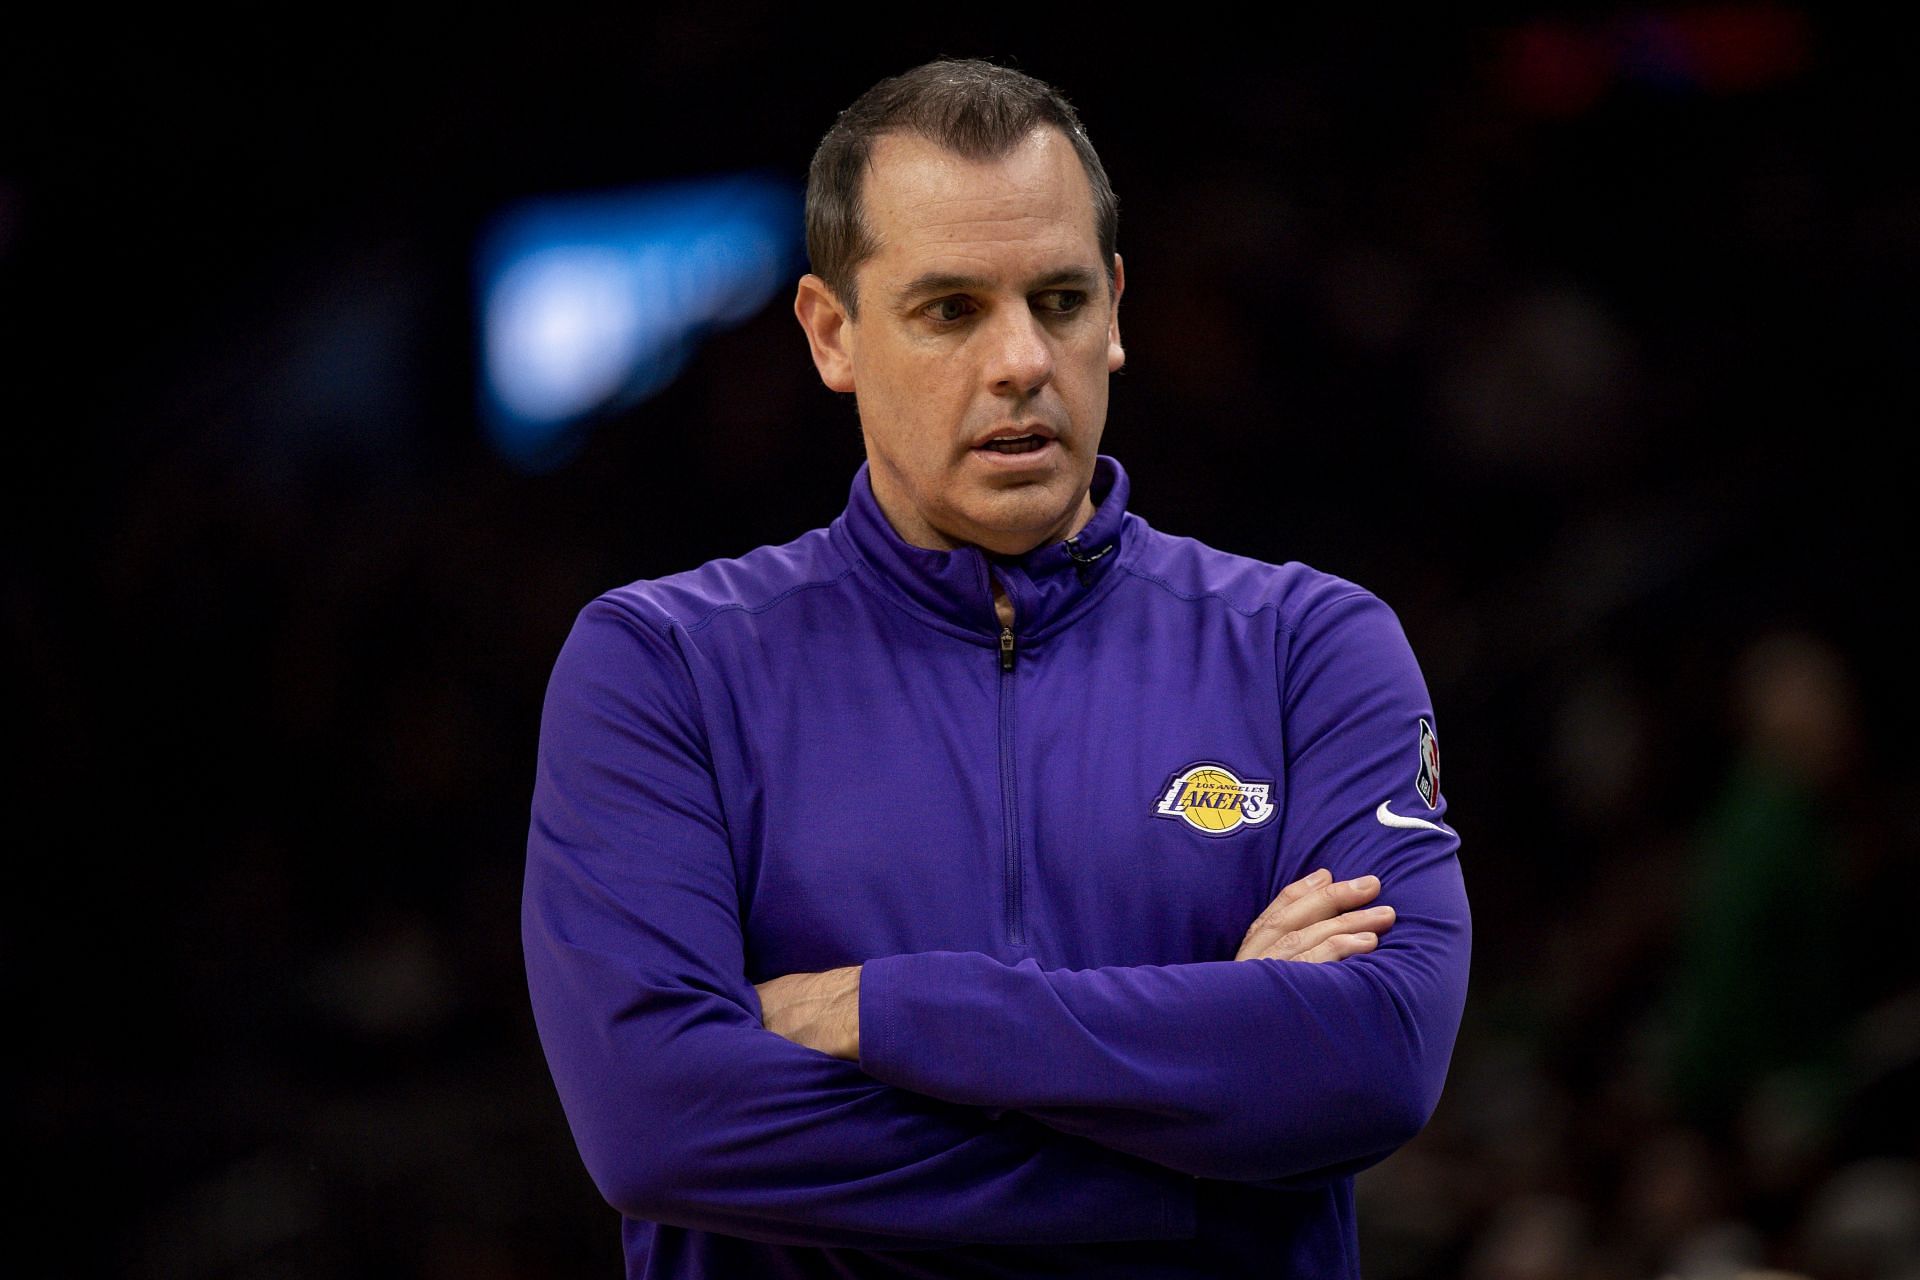 LA Lakers coach Frank Vogel appears to be on the hot seat